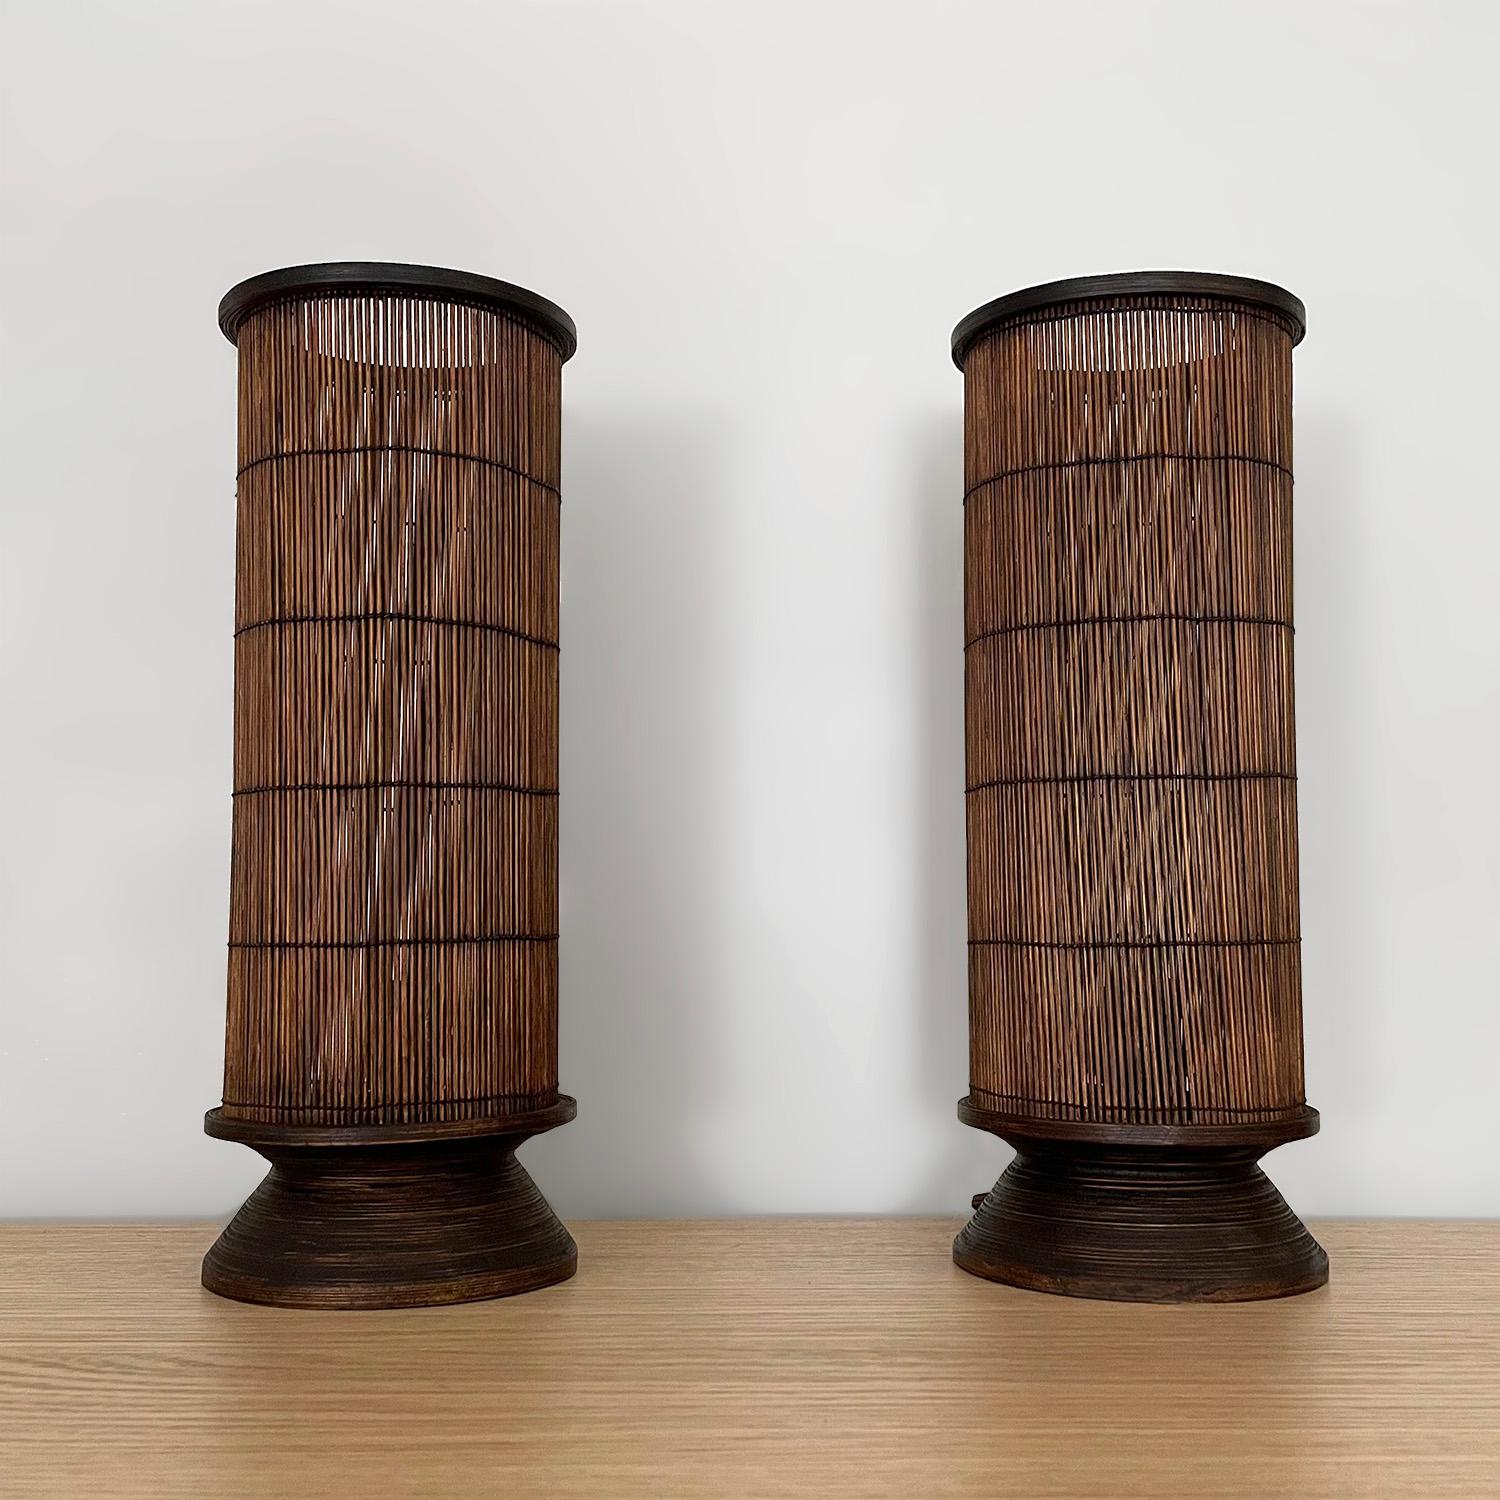 Pair of French rattan lamps
France, circa 1970’s
Cylindrical lamp shades are comprised of delicately woven reeds
Natural color variations
Organic composition and feel
Patina from age and use
Newly rewired
Single socket candelabra base
Priced and